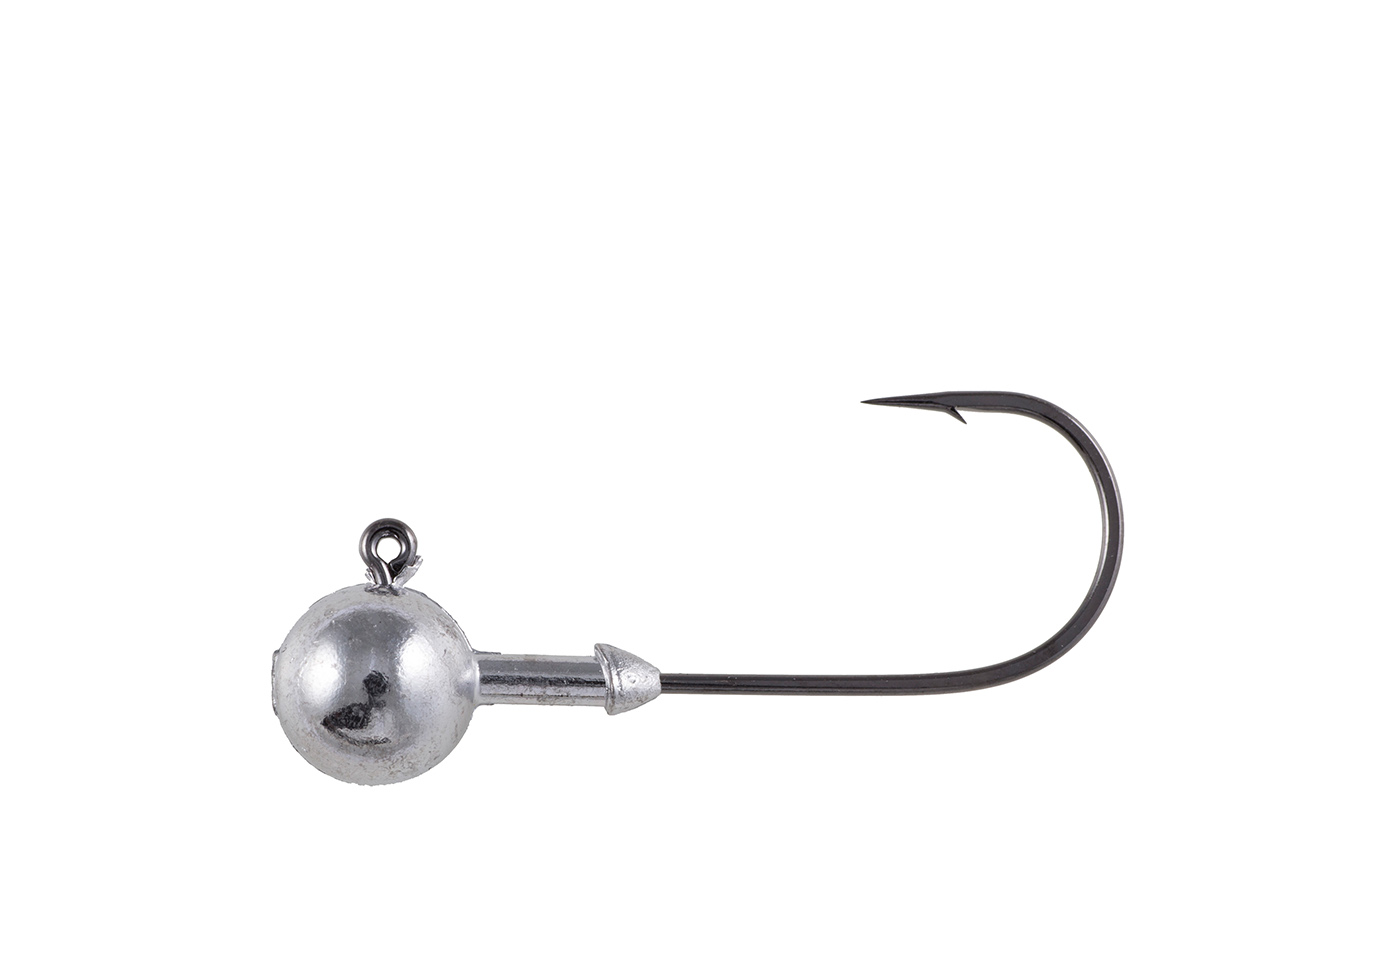 60 Port Lead Head Jig Hooks With 7g311b Micro Jig Lure From Mmjyt, $13.57